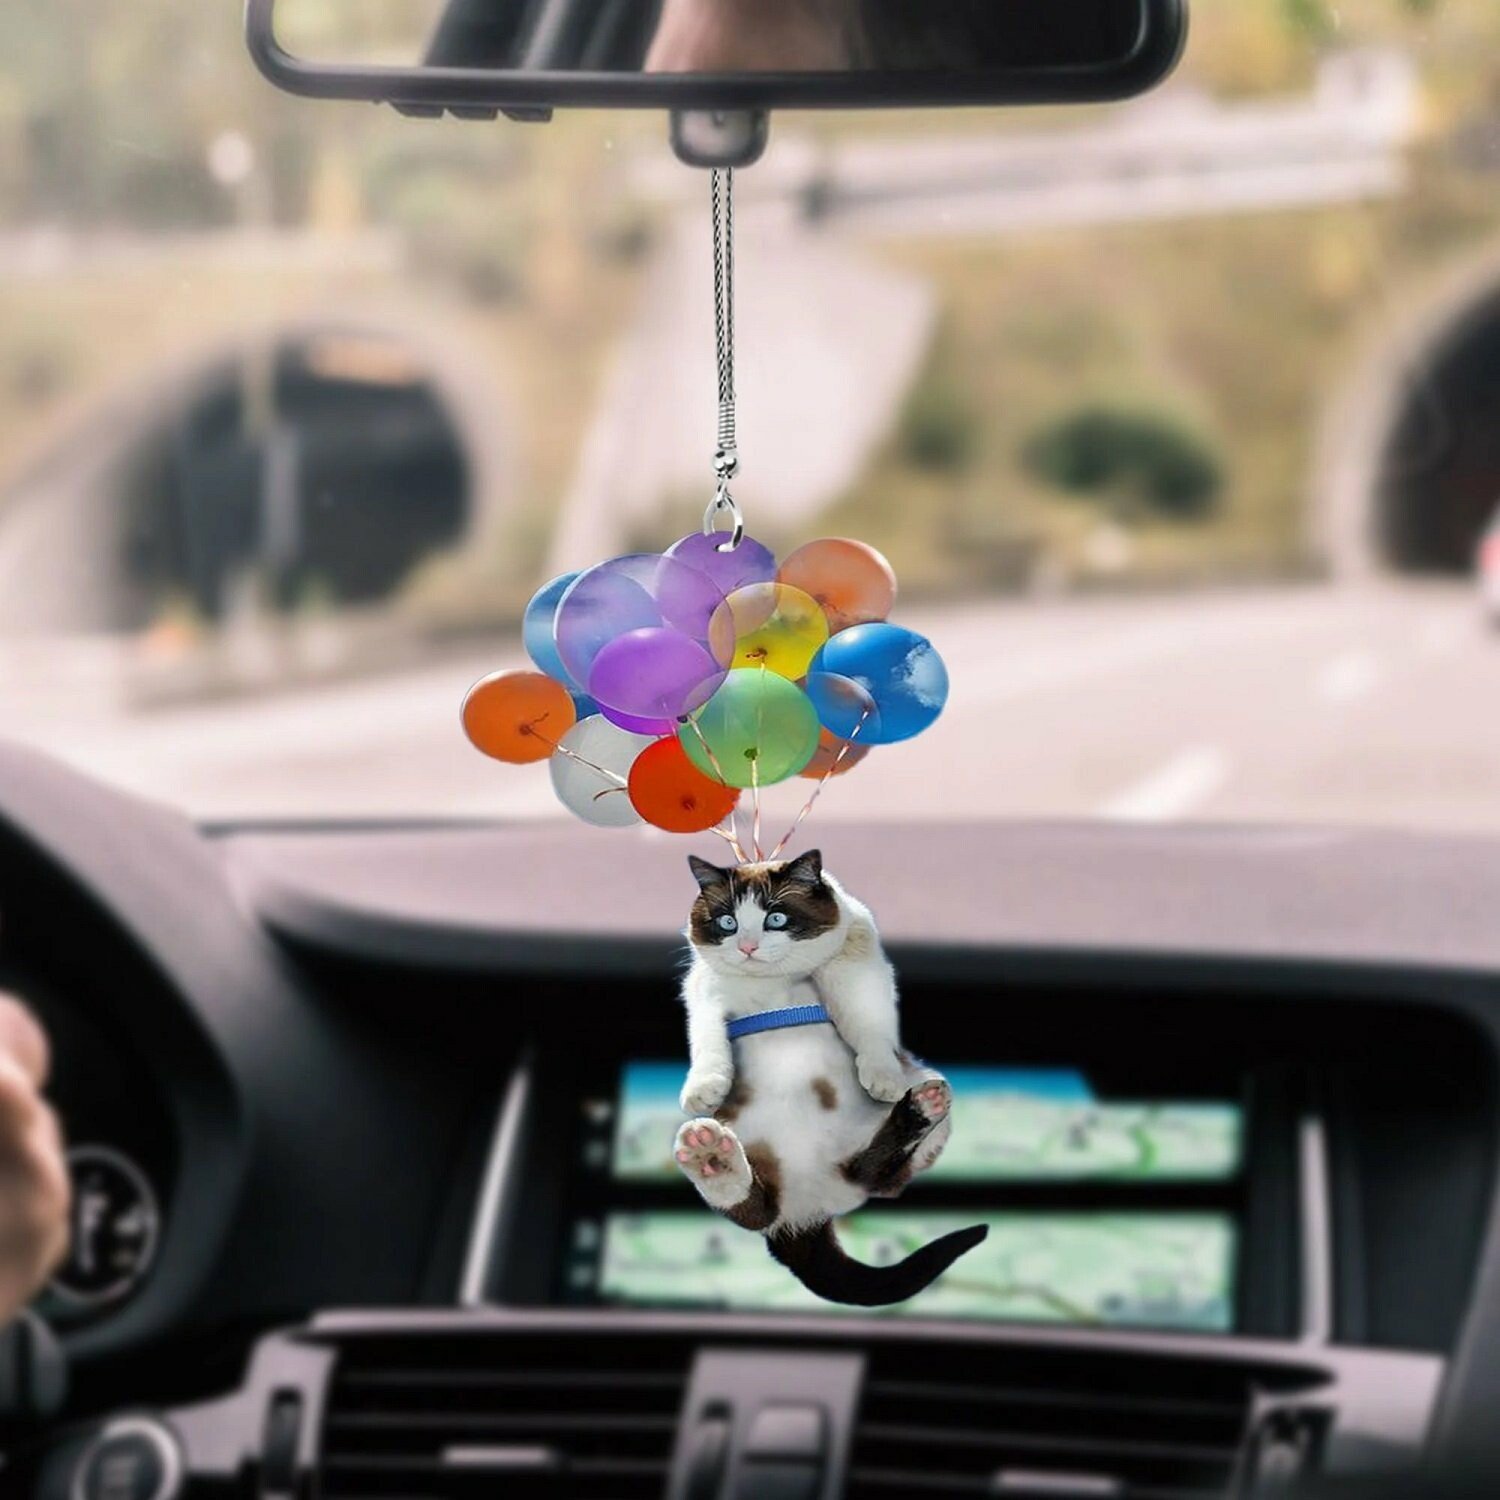 CAT CAR HANGING ORNAMENT[BUY 2 FREE SHIPPING]